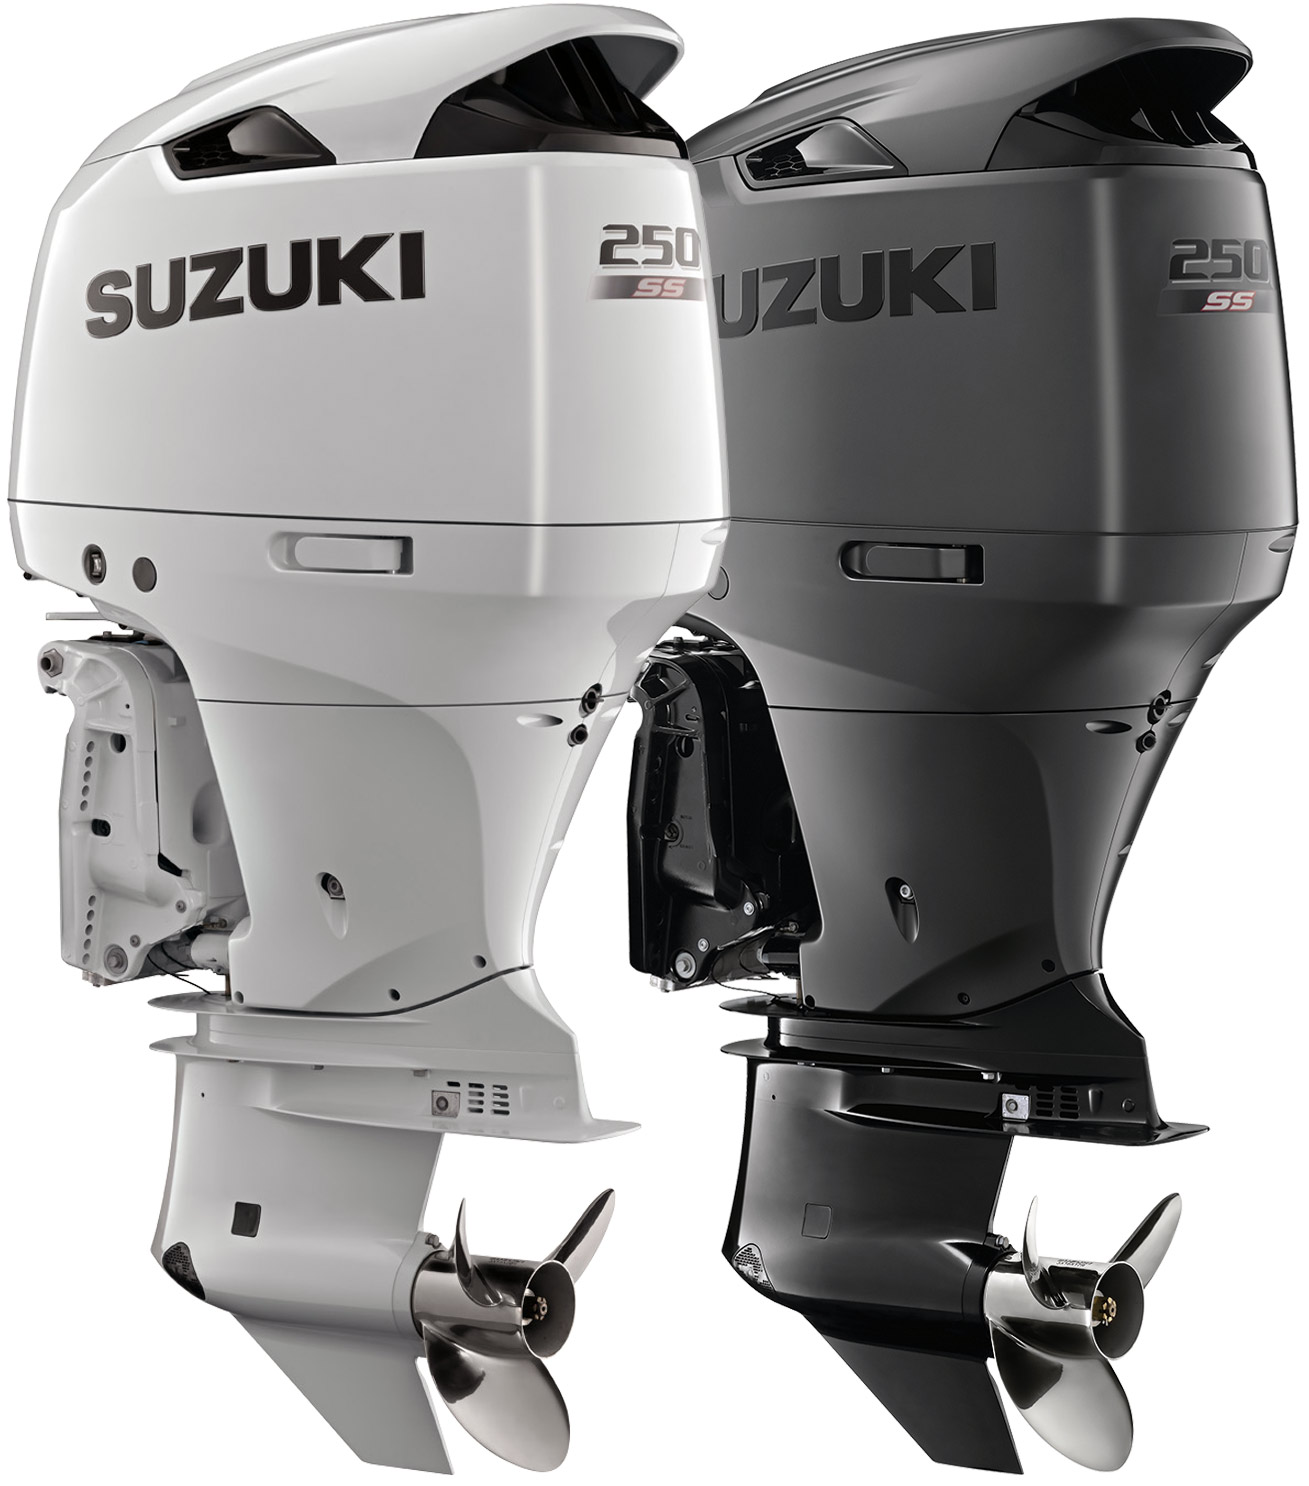 the new Suzuki DF250SS “SS” Series outboard motor in, one white and the other black